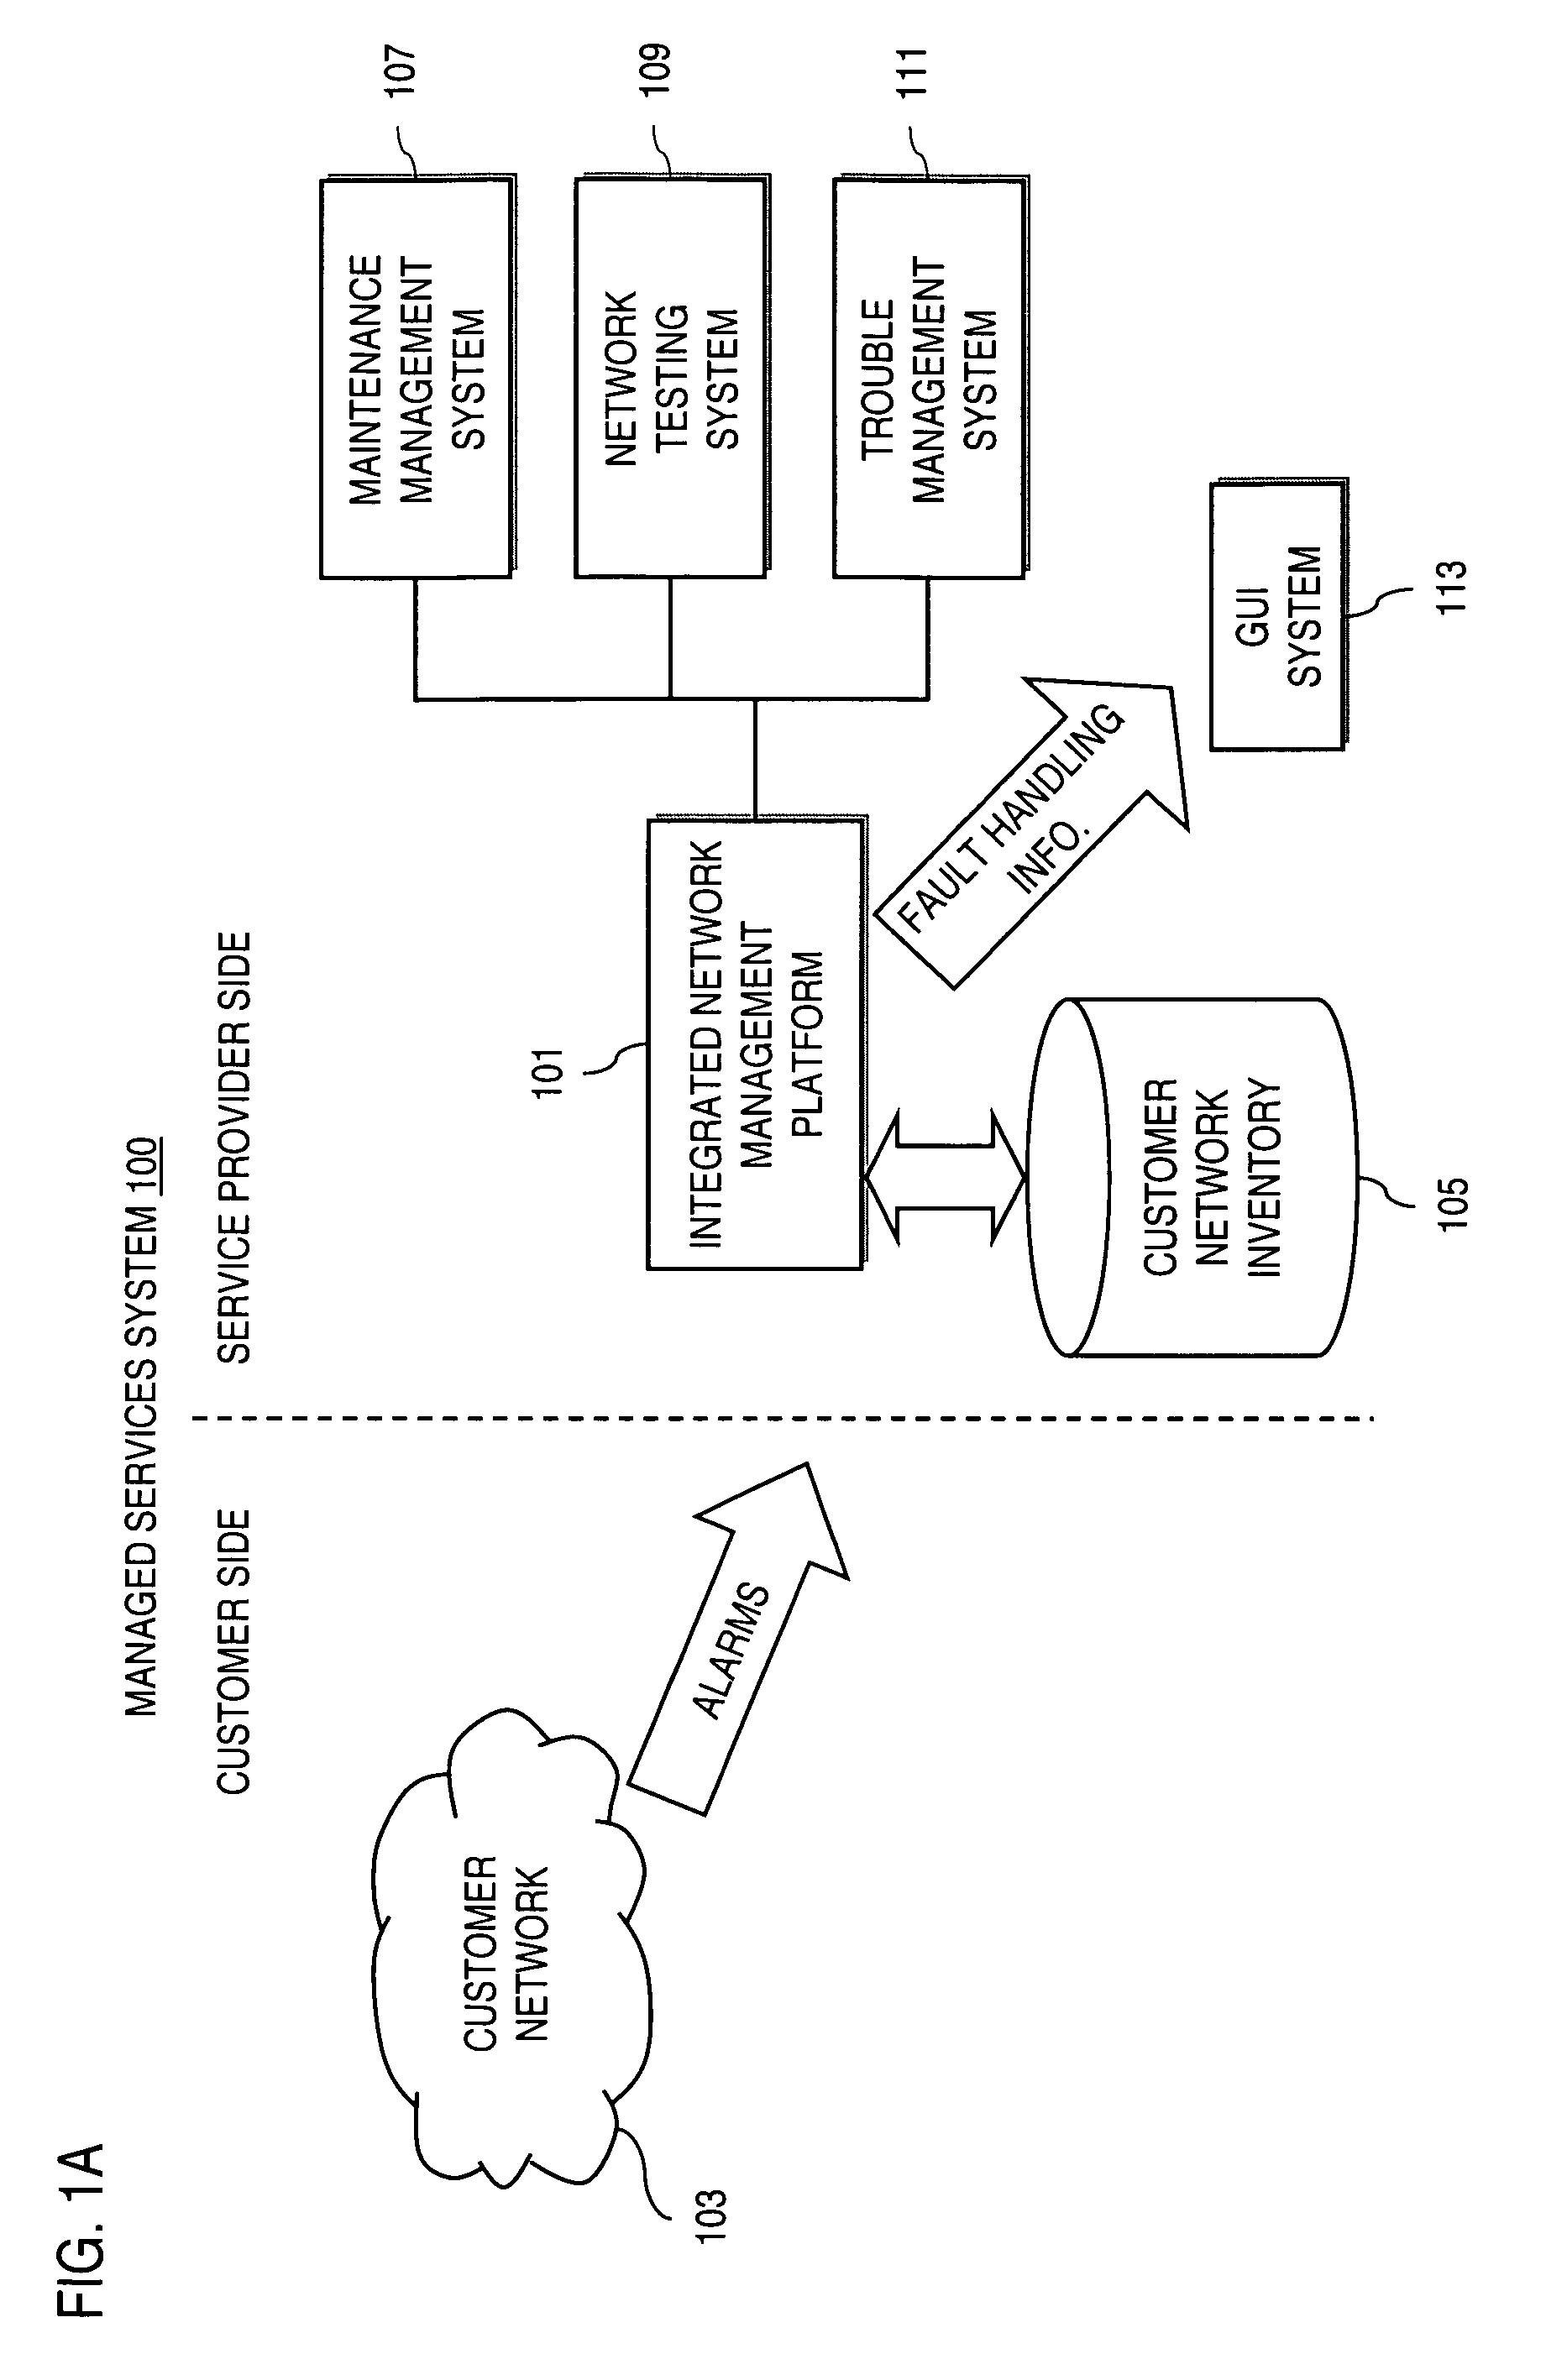 Method and system for processing fault alarms and maintenance events in a managed network services system